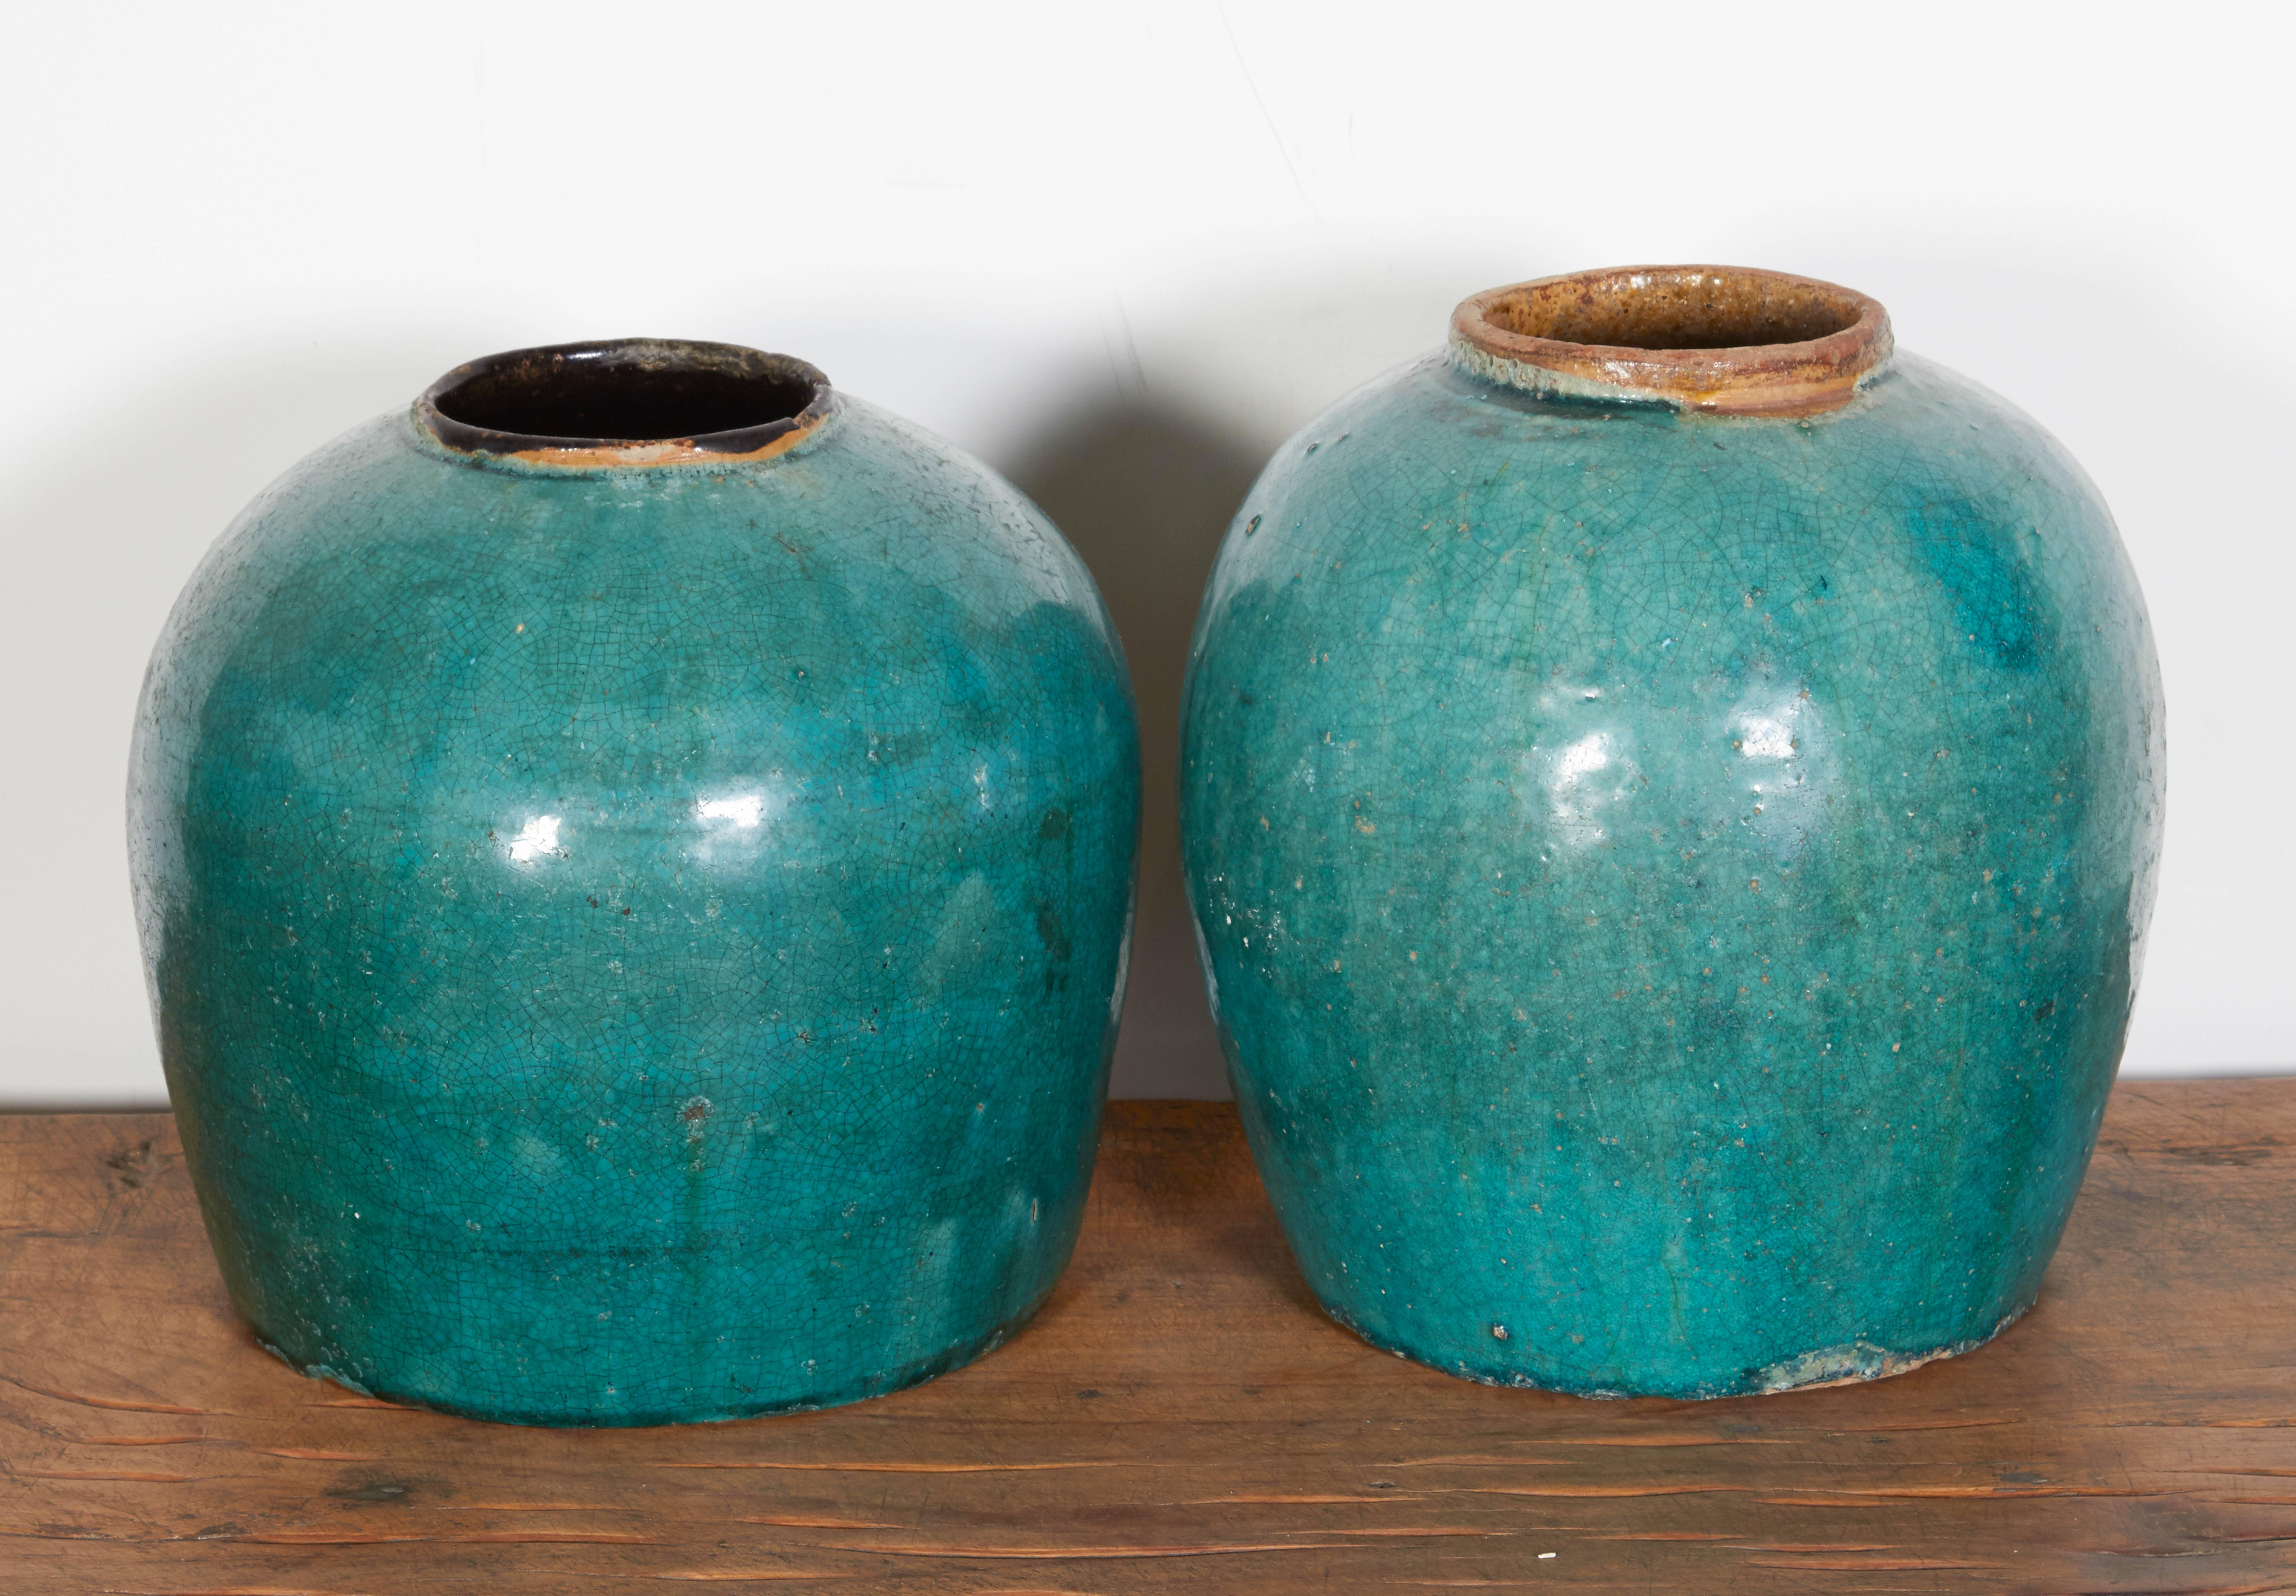 Antique Chinese ceramic ginger jars, classically shaped and beautifully glazed.
From Hunan Province, circa 1880.
Priced individually. Sizes vary somewhat, contact shop for exact measurements.
Left jar in main image is available.
CR655, CR639.